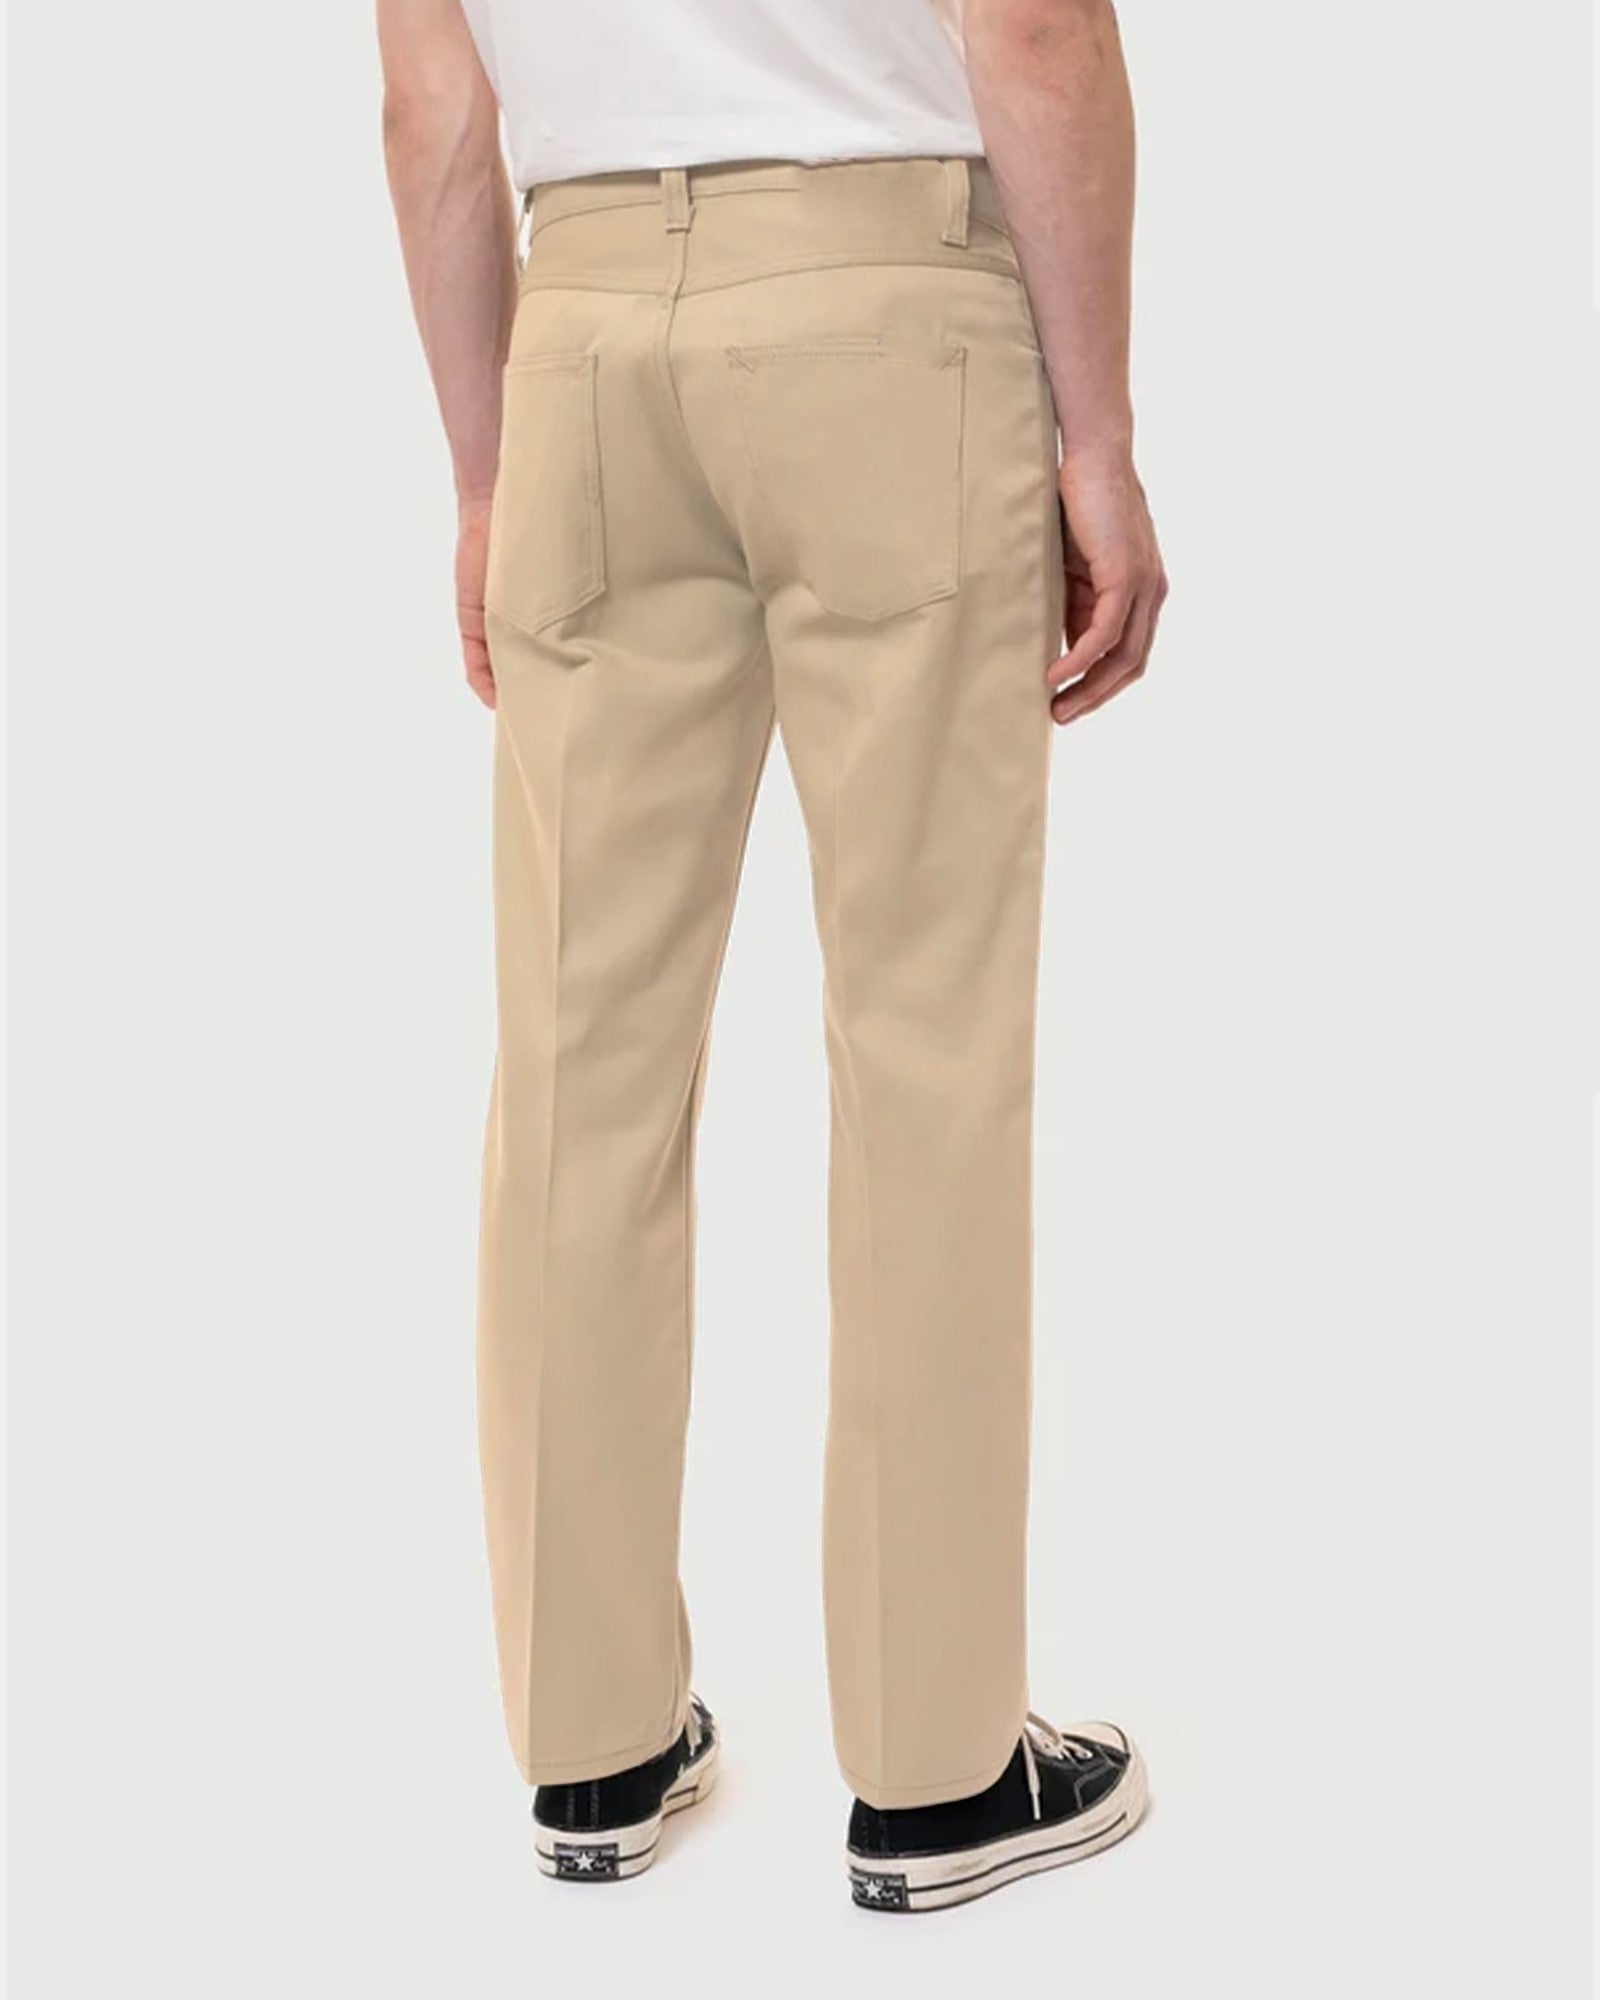 Men's Solid Casual Chino